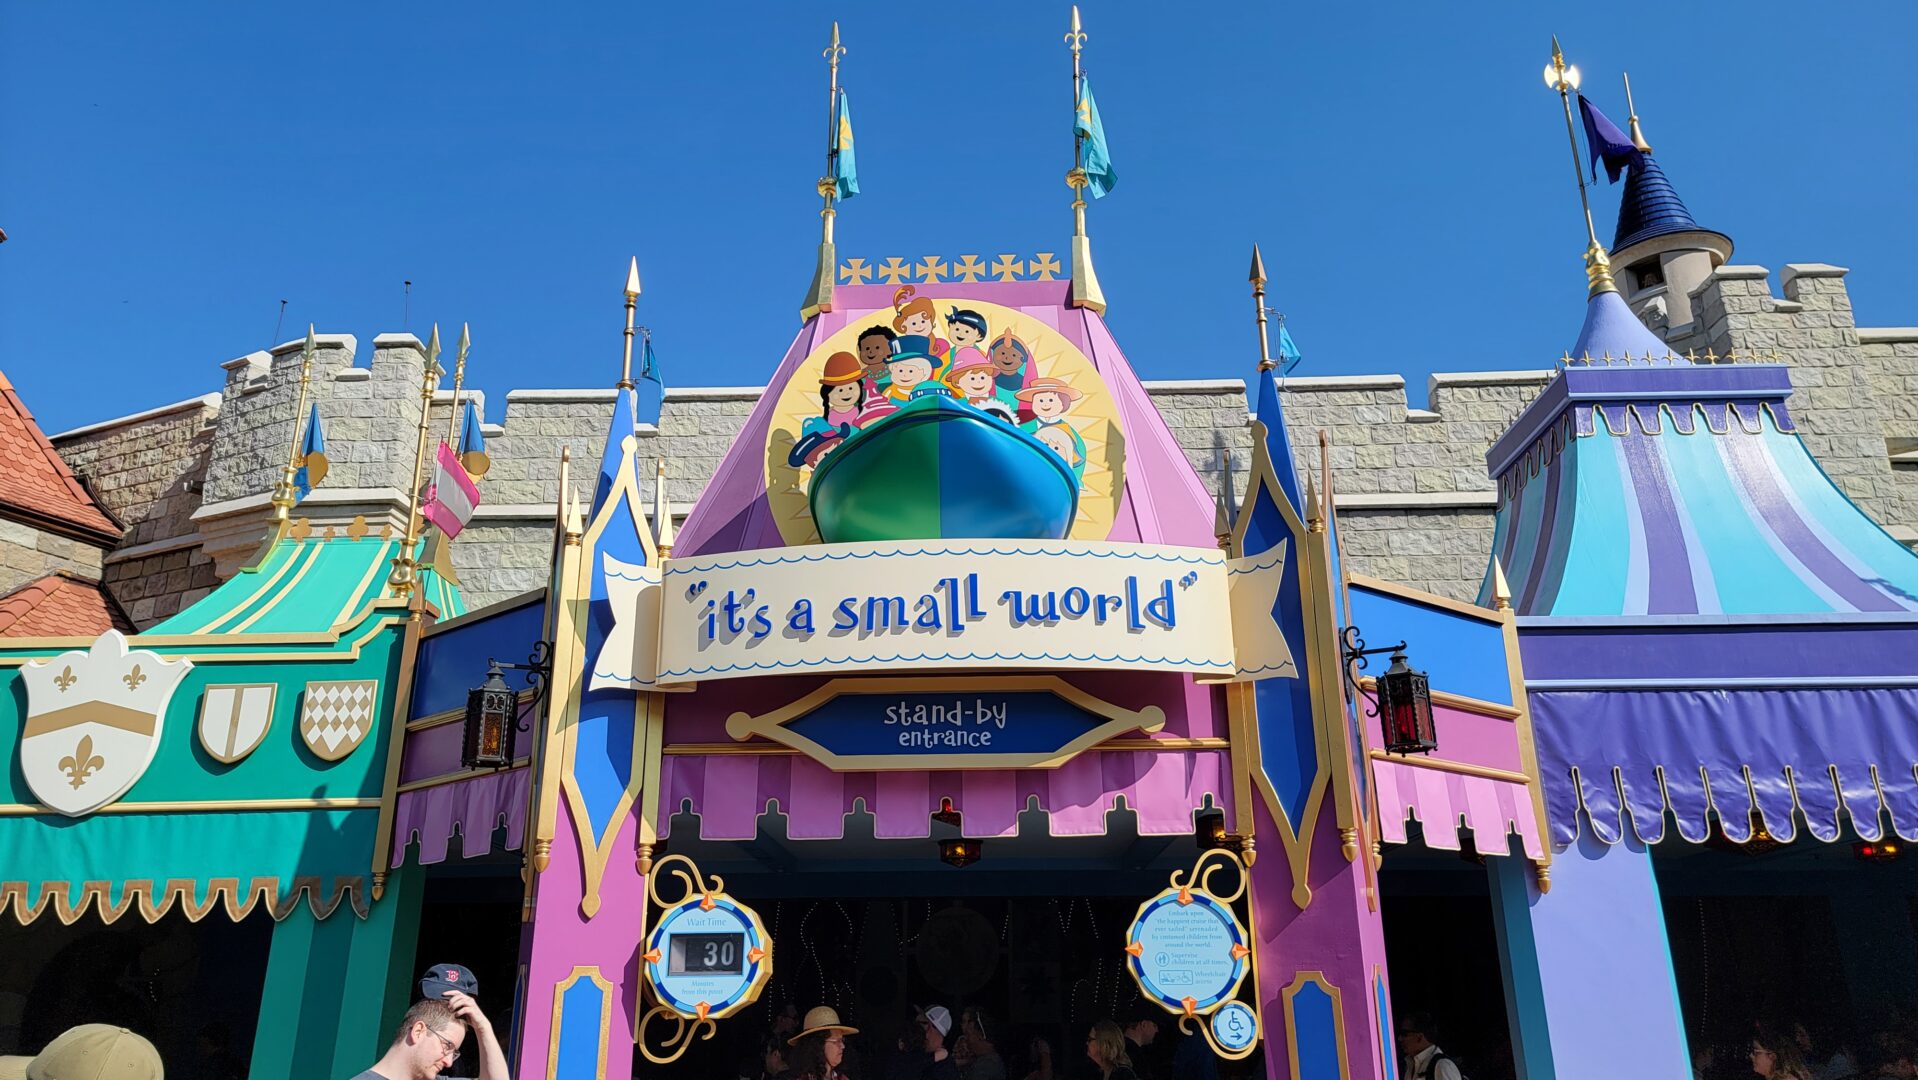 Photos & Video: New doll in a wheelchair added to ‘it’s a small world’